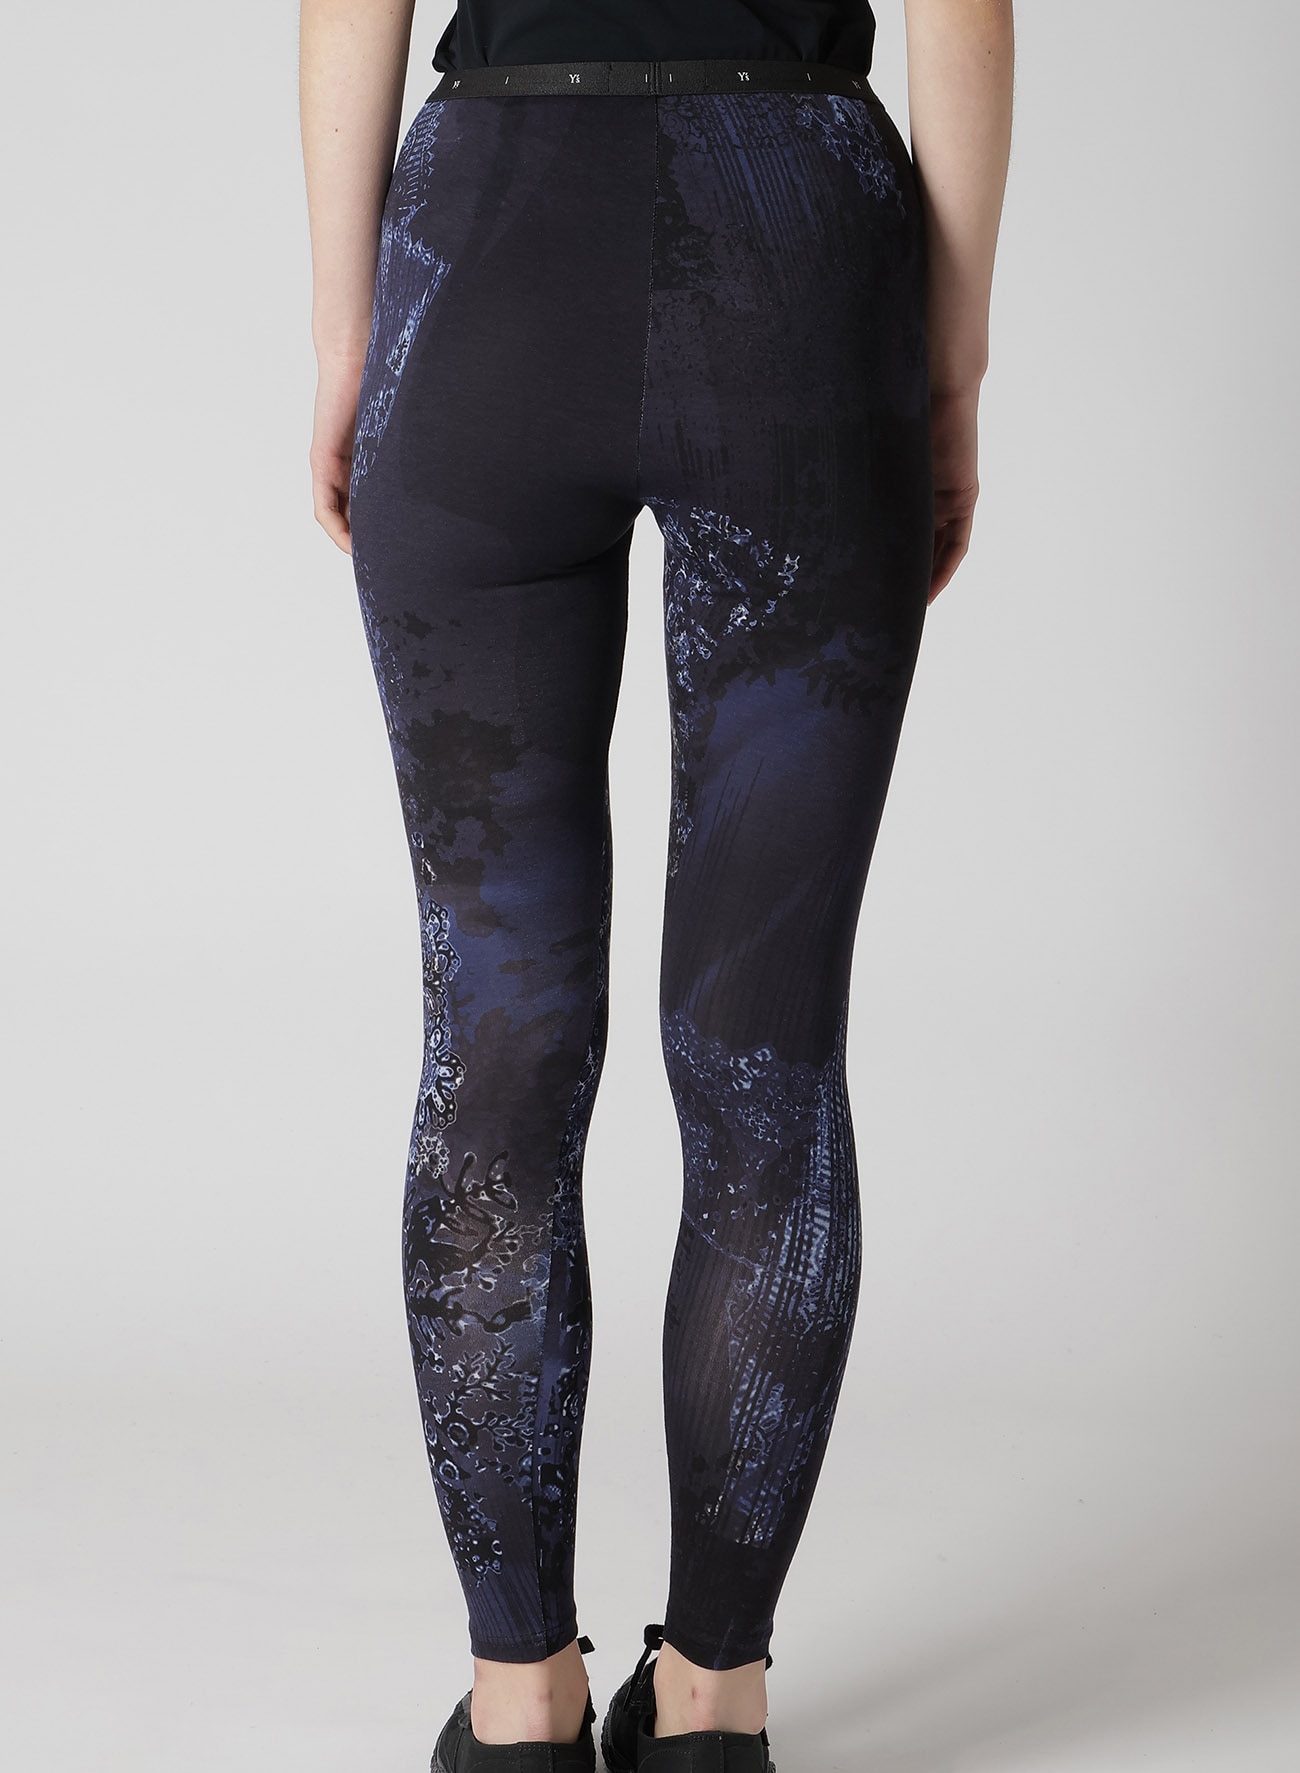 【8/2 12:00 Release】40/-RY JERSEY LACE DESIGN P LEGGINGS